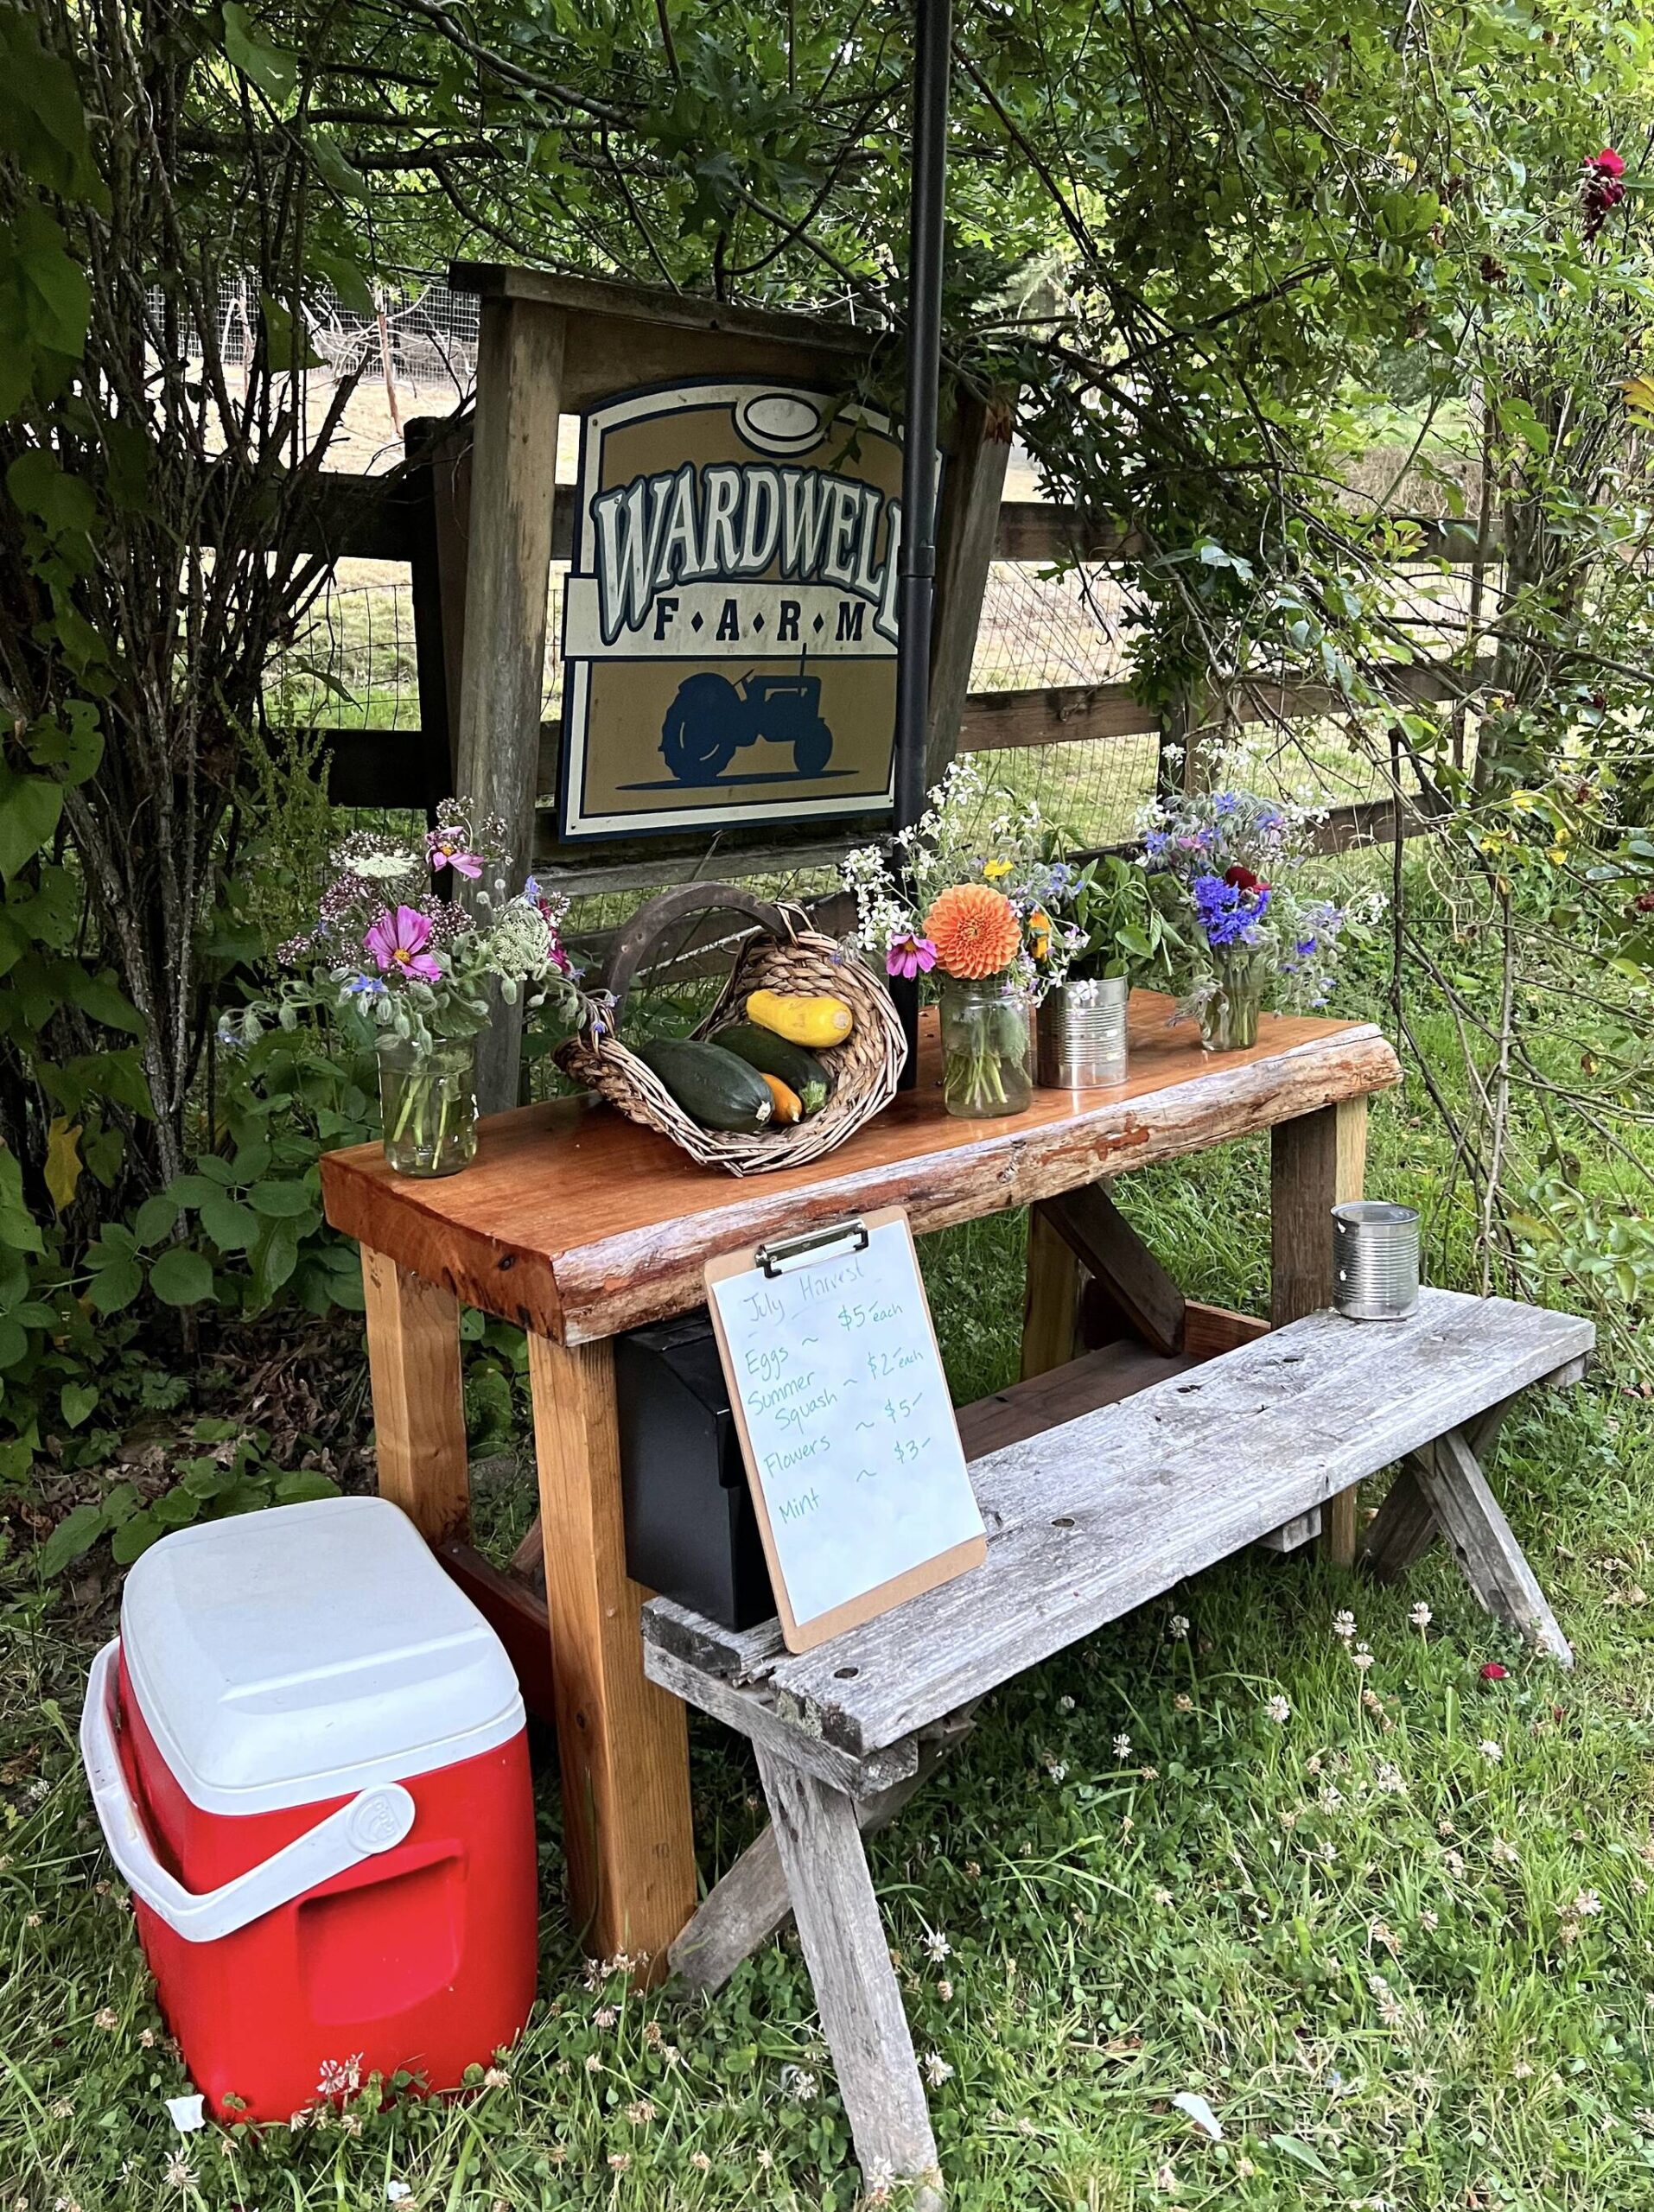 The produce stand at Wardwell Farm has fresh eggs, flowers and plenty of zucchini.